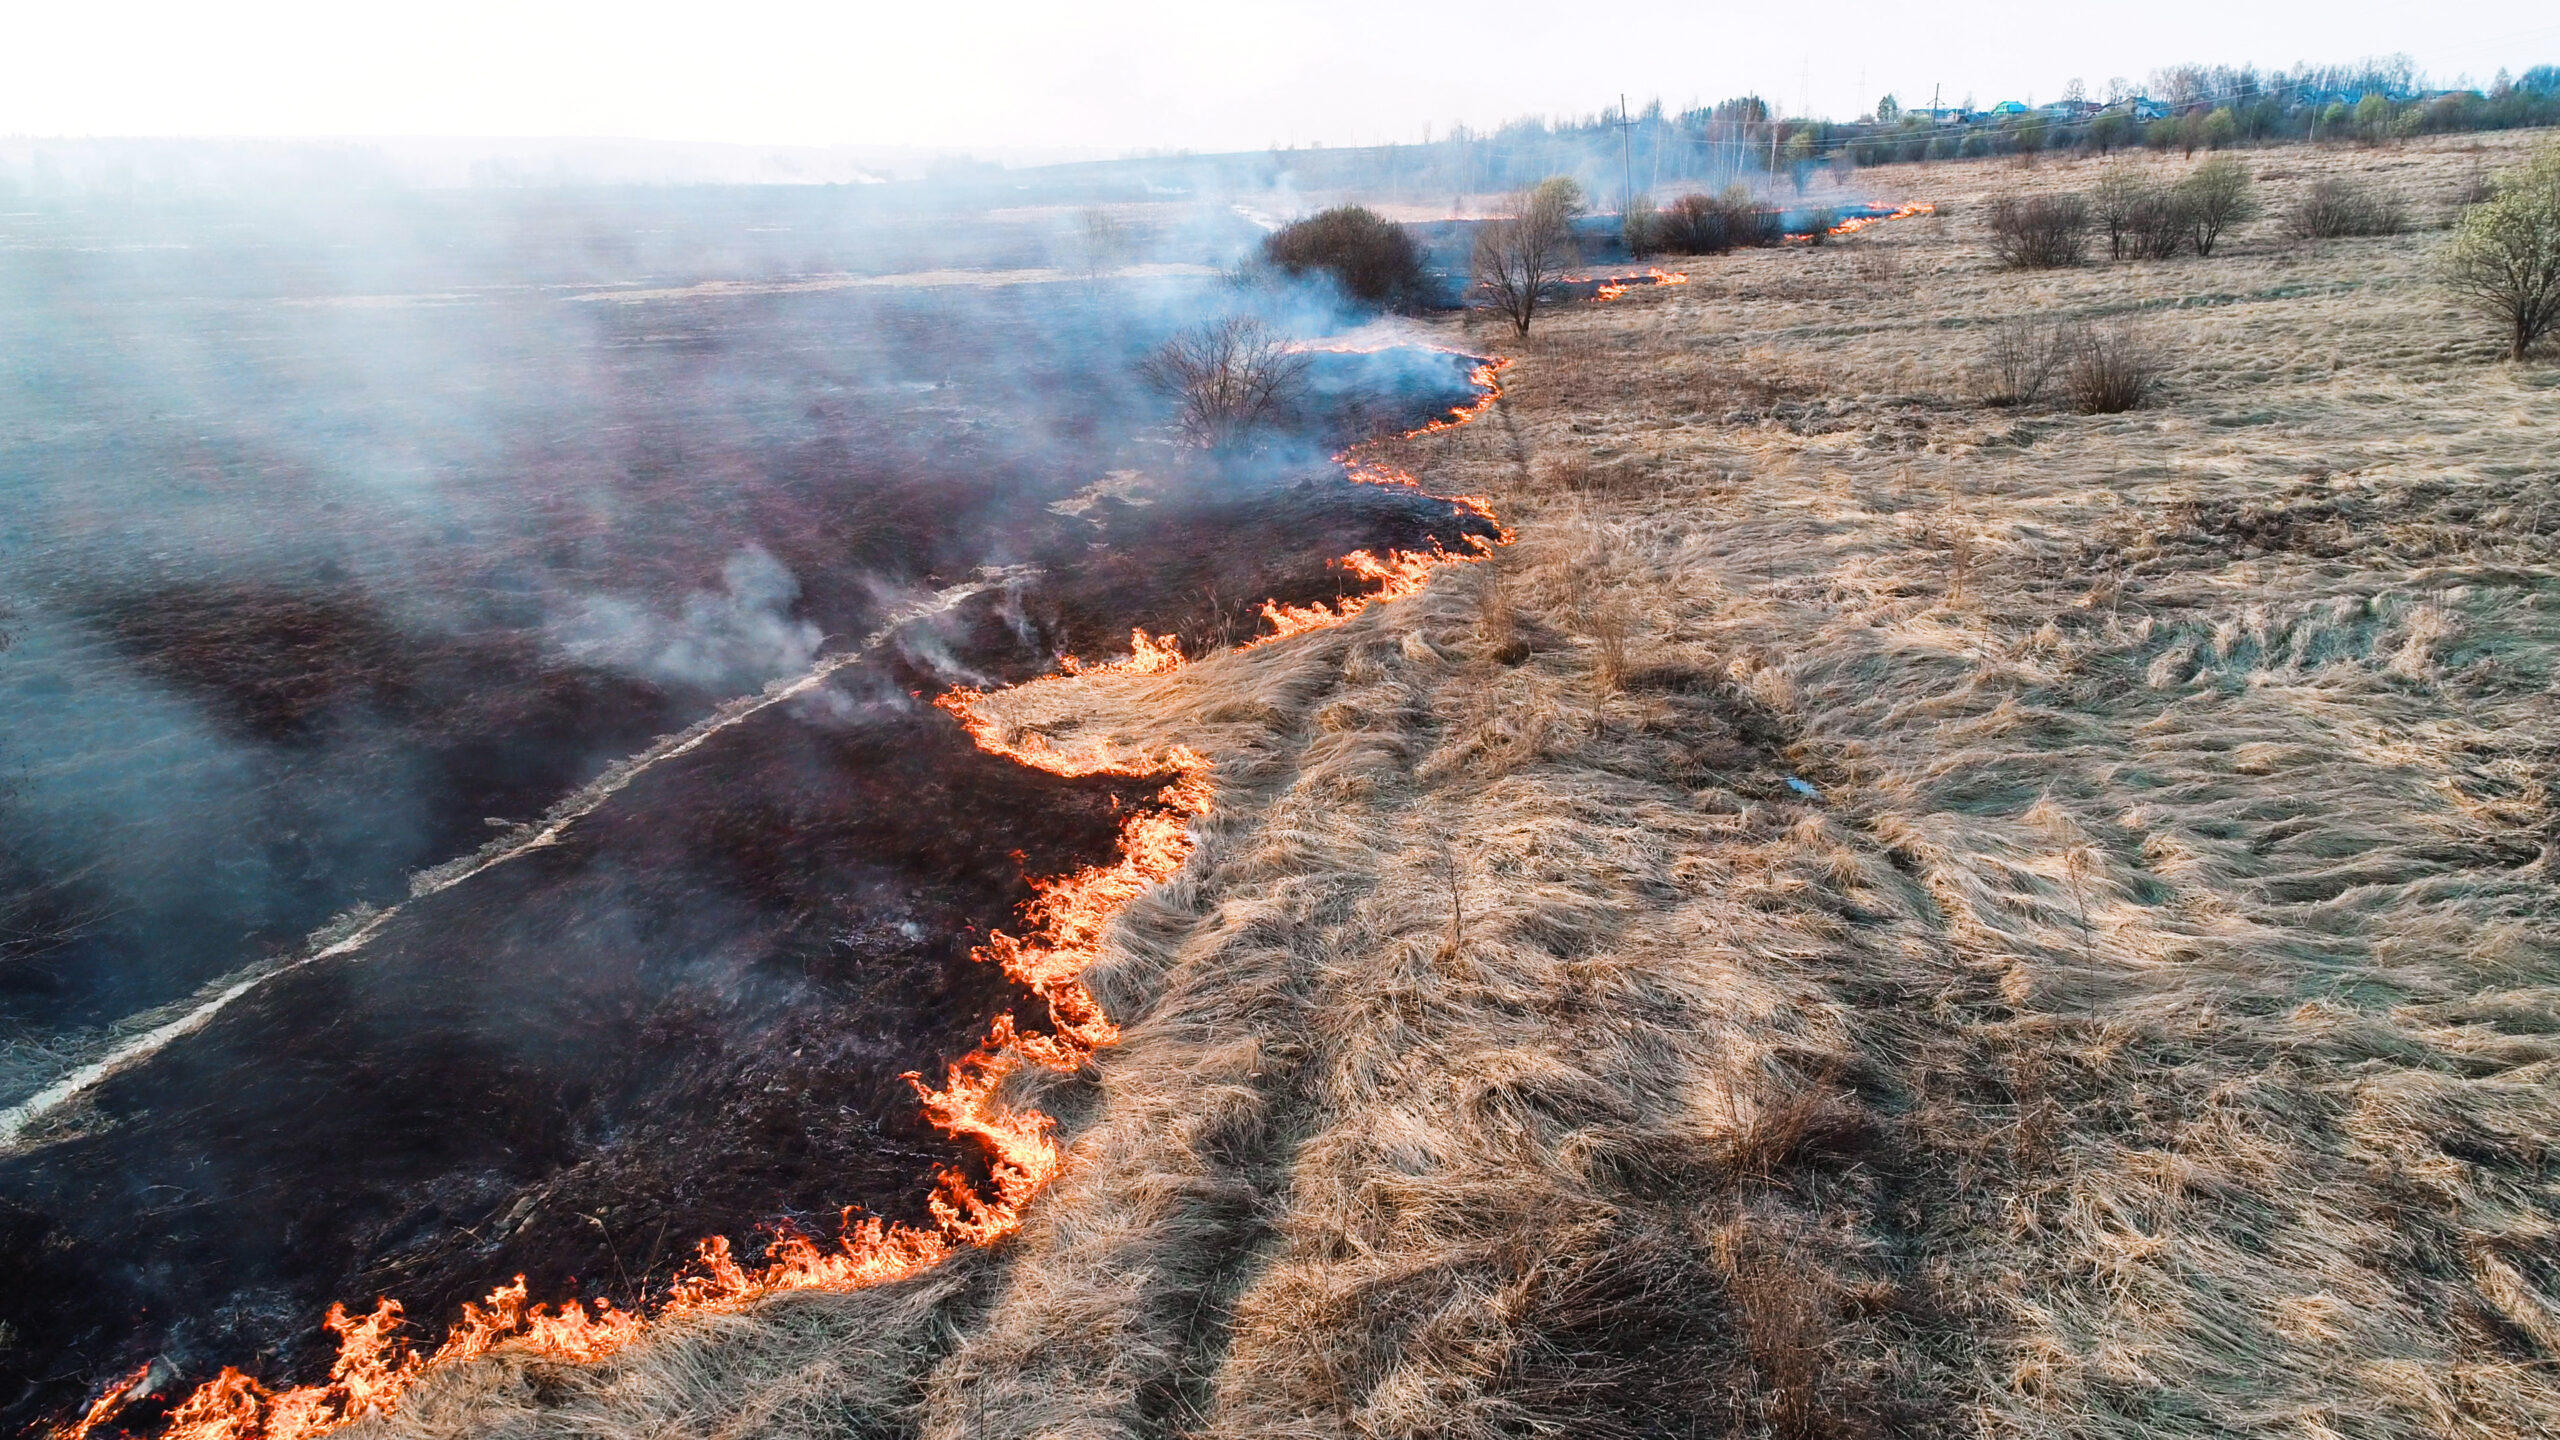 Aerial view of a wildfire spreading across the Texas Panhandle, with visible flames engulfing dry grassland and smoke billowing into the sky.